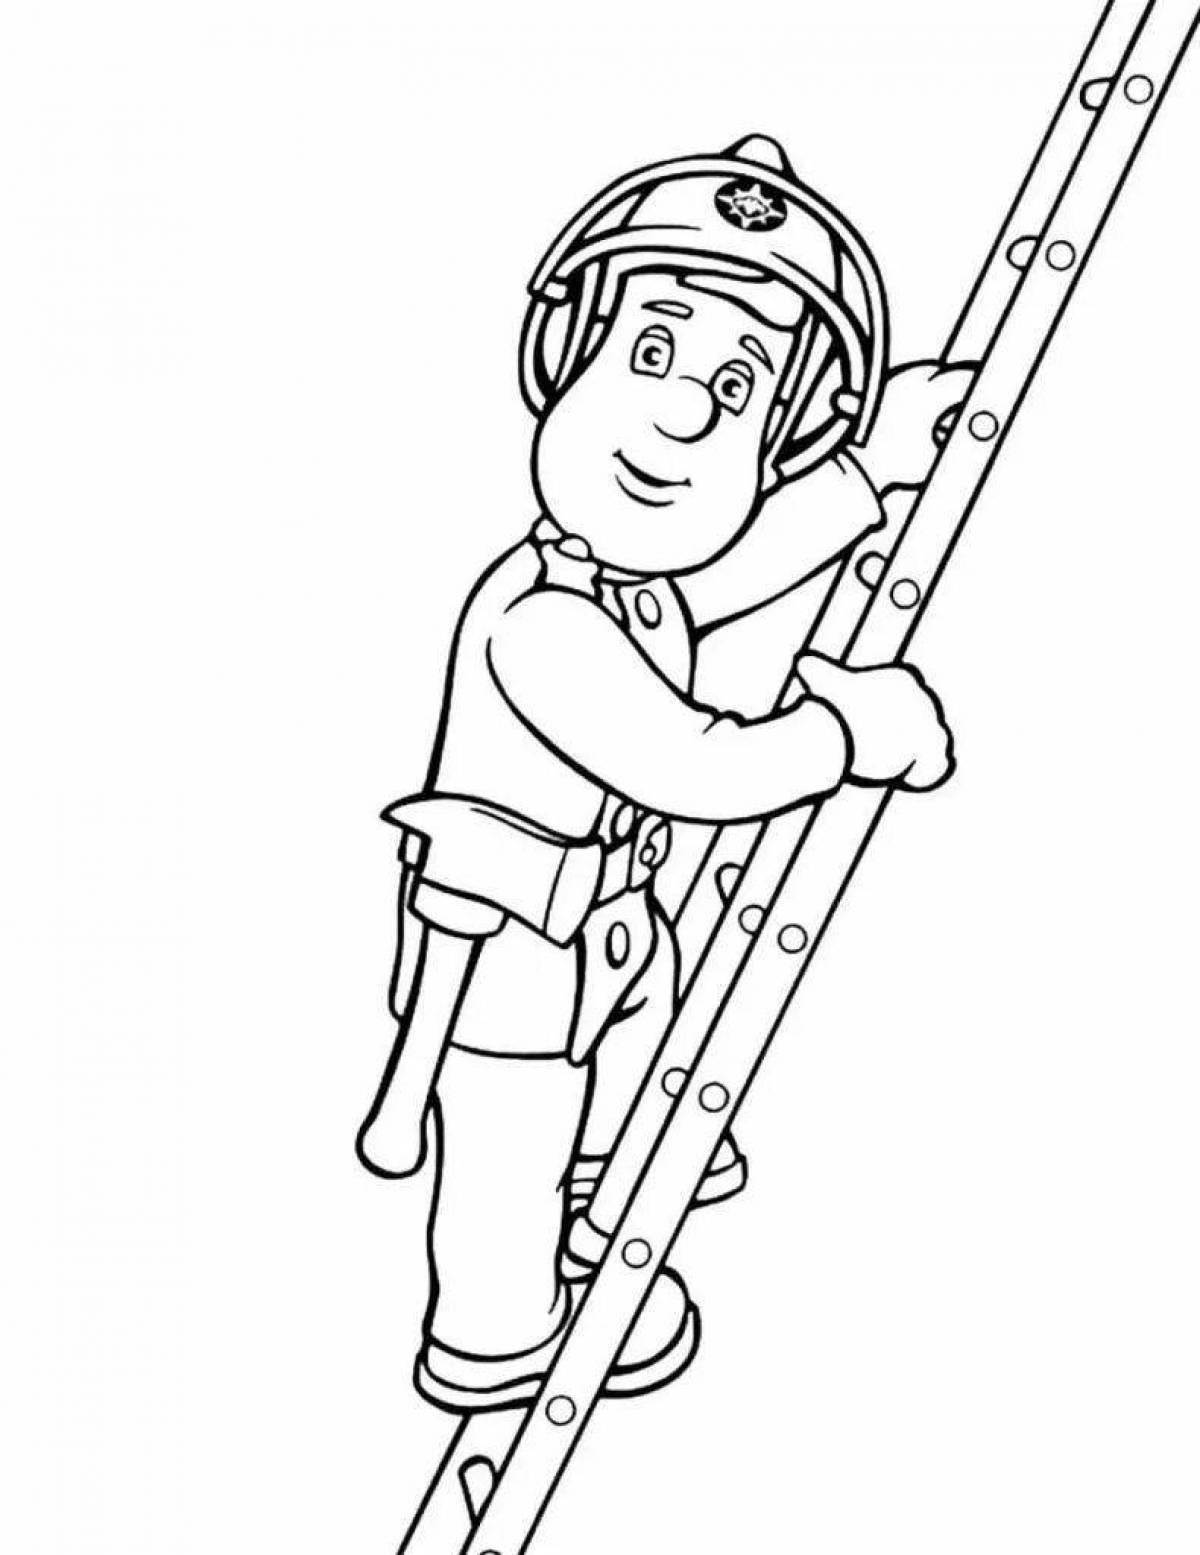 Coloring page funny lifeguards